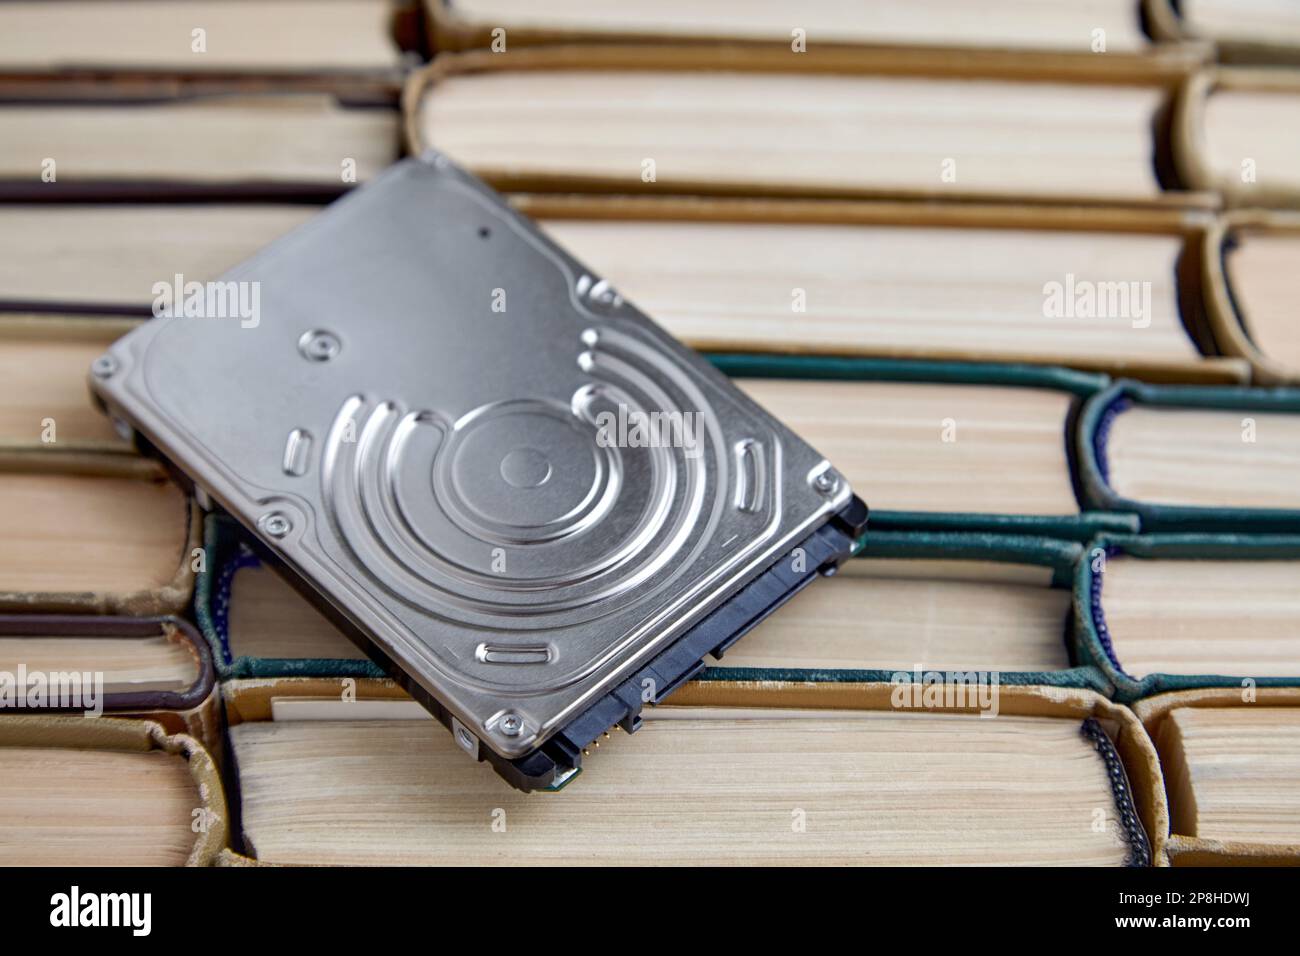 The hard drive of the computer lies on a pile of shabby paper books. Carriers of information from different eras. Stock Photo